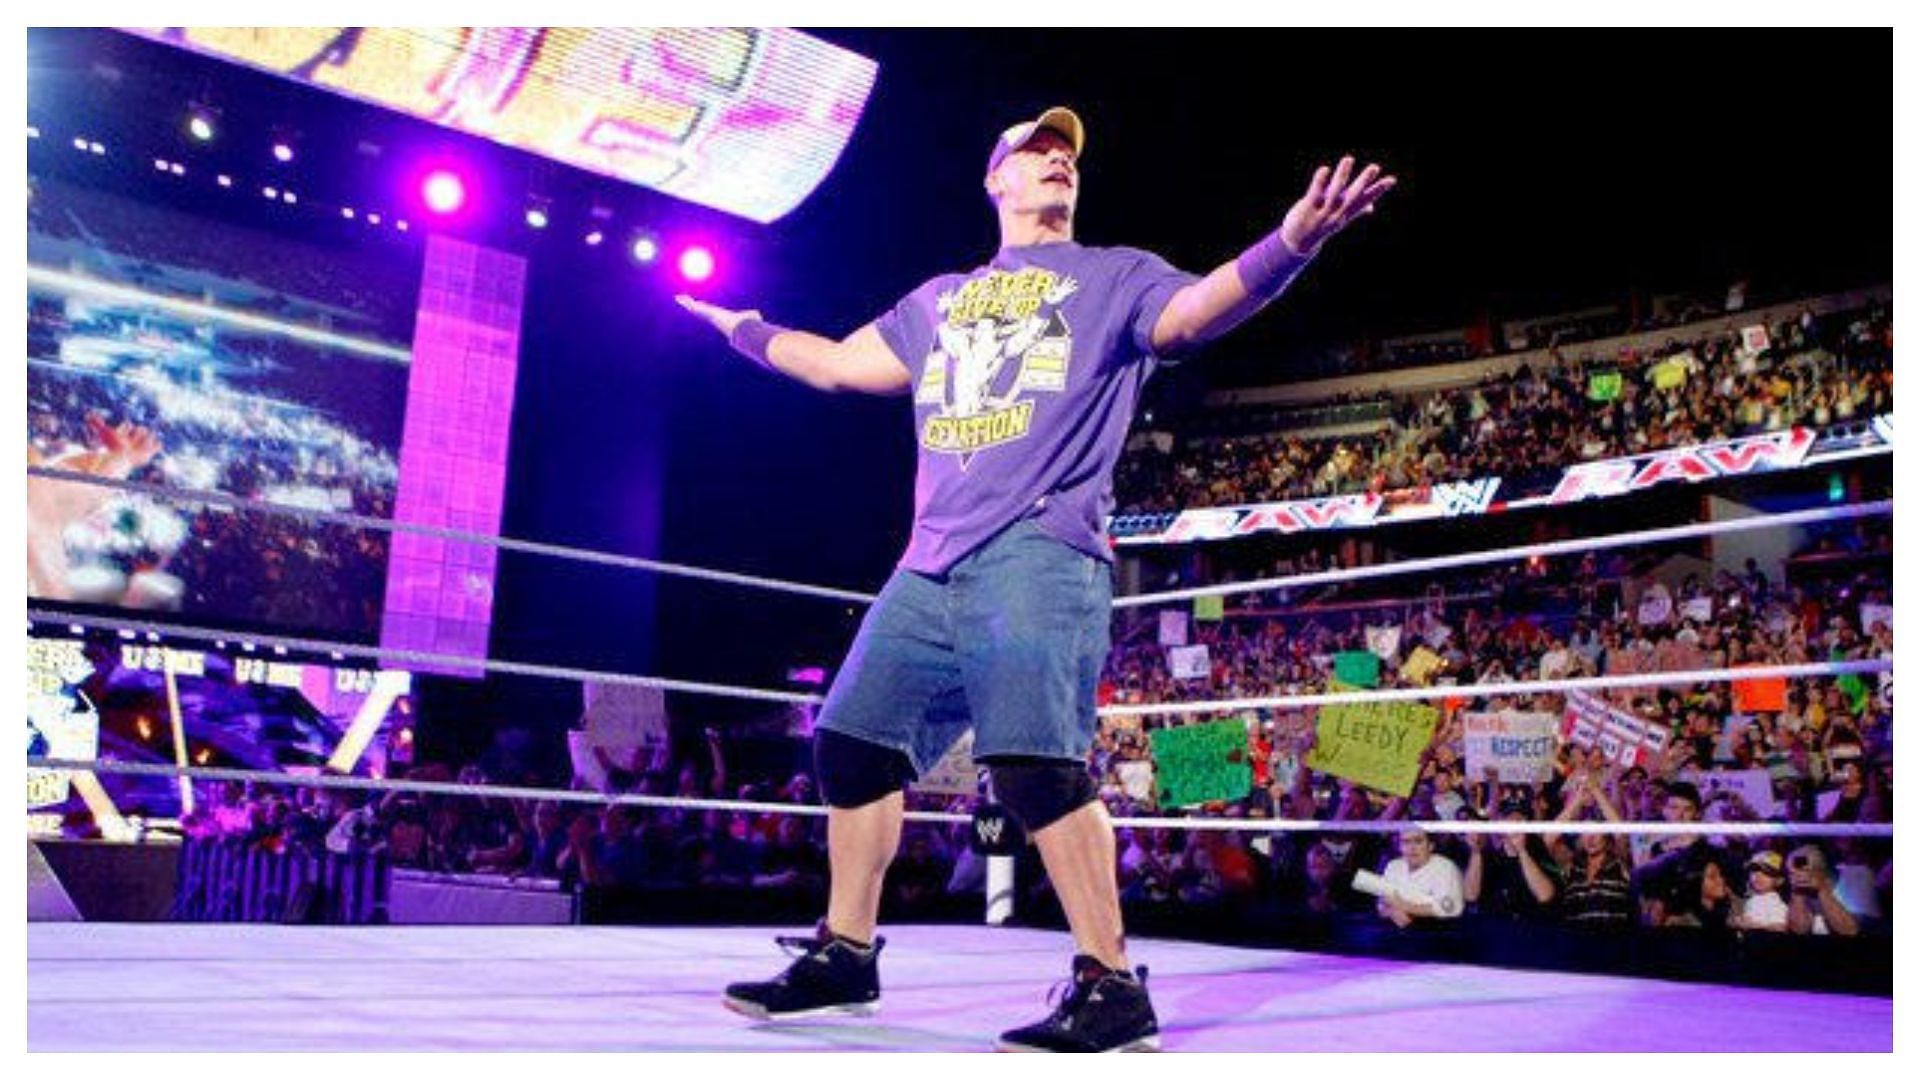 Cena bids a shortlived farewell to the WWE Universe